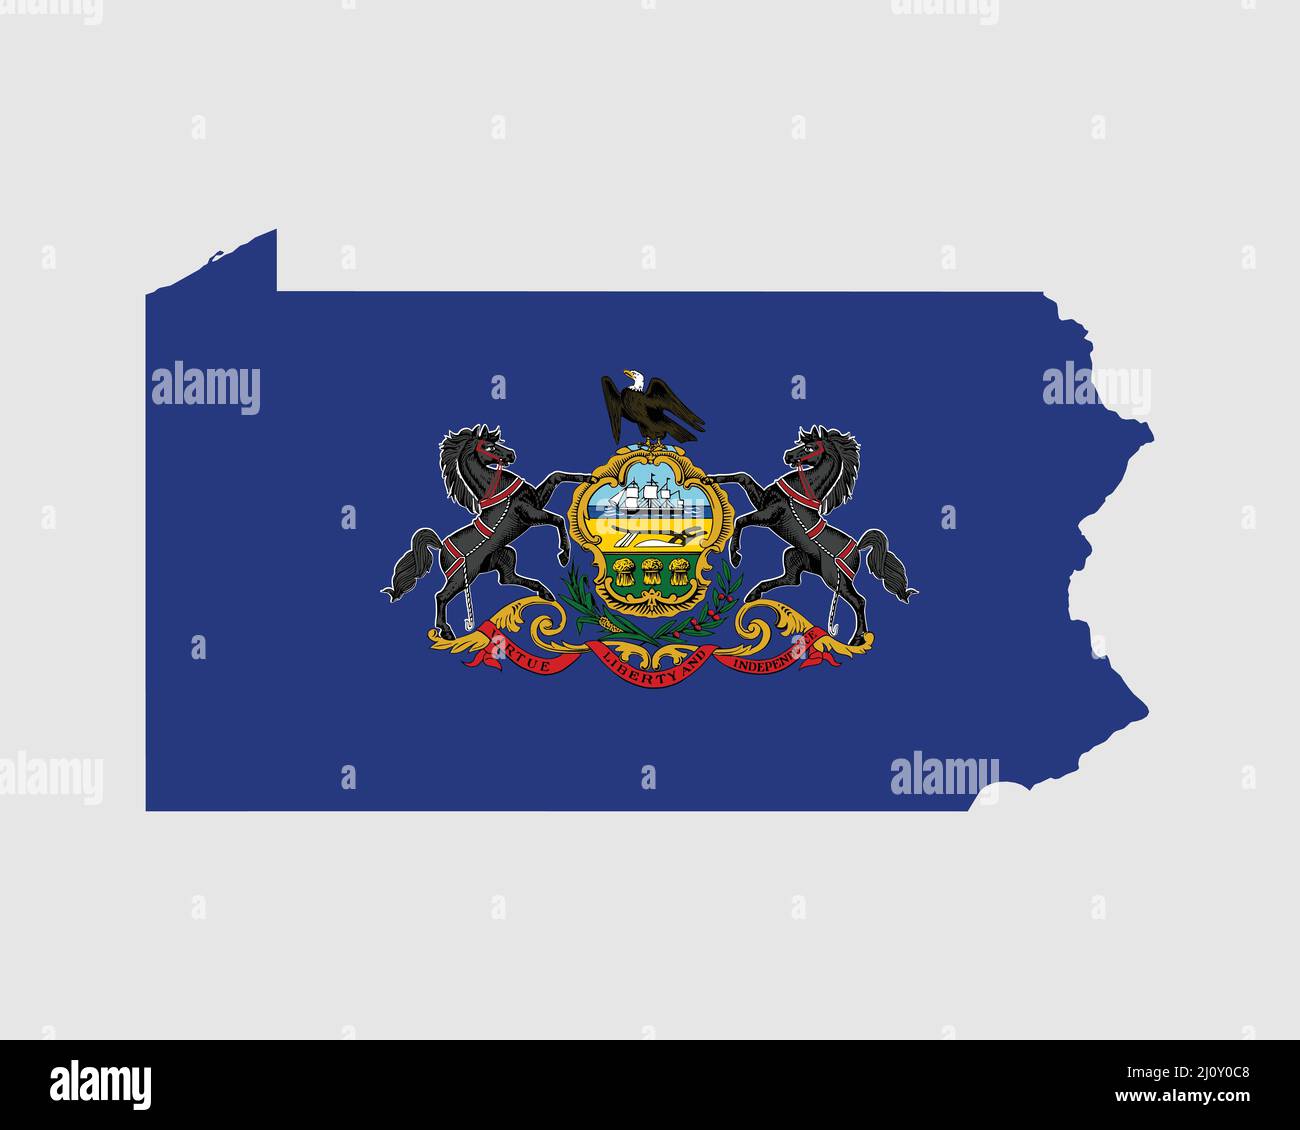 Pennsylvania Map Flag. Map of PA, USA with the state flag. United States, America, American, United States of America, US State Banner. Vector Stock Vector